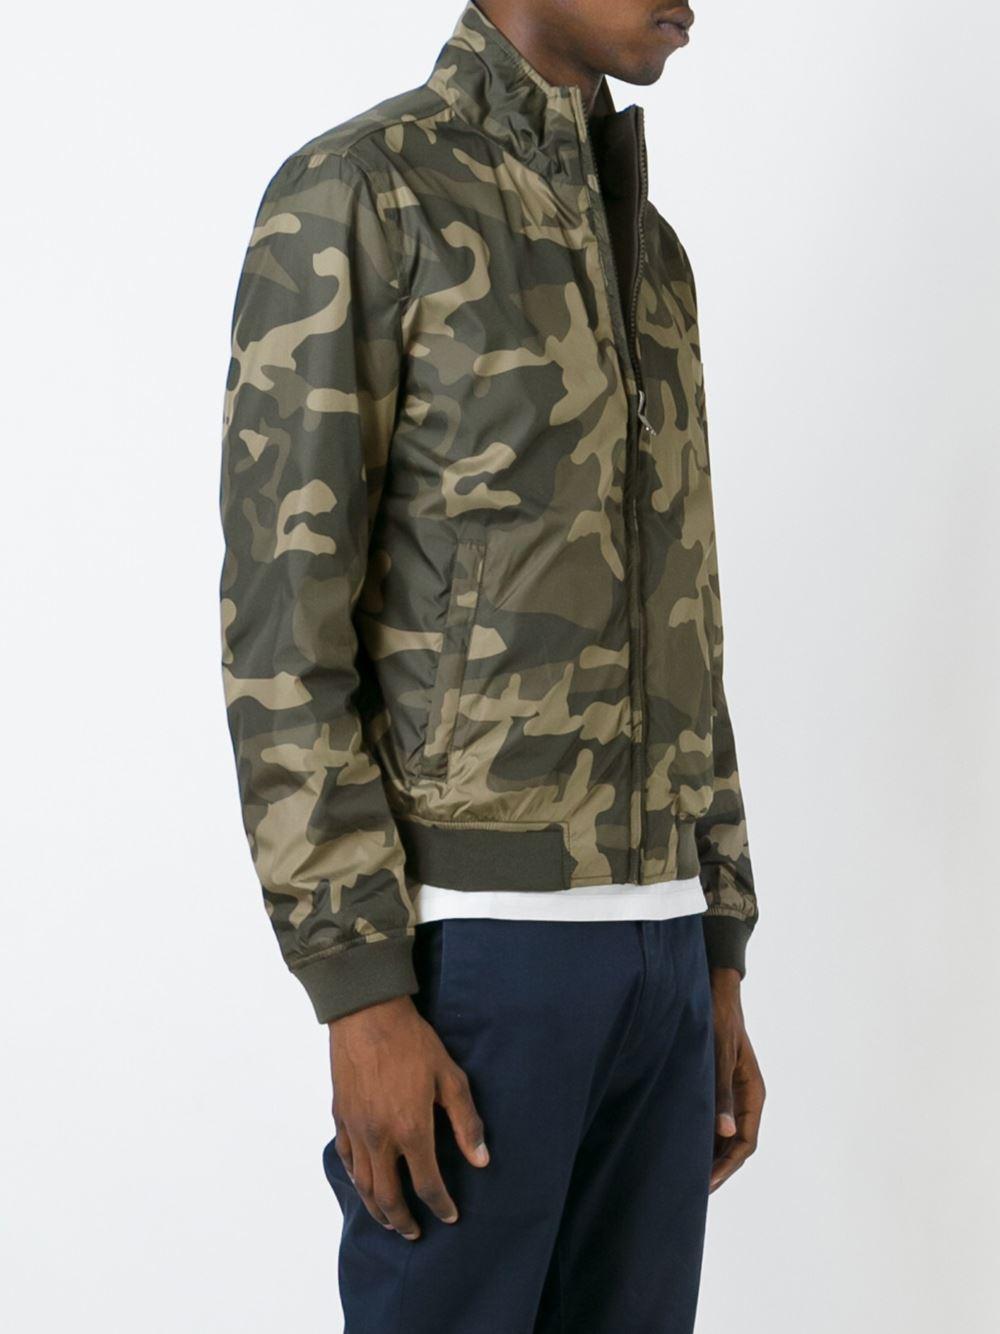 Lyst - Woolrich Camouflage Reversible Bomber Jacket in Green for Men